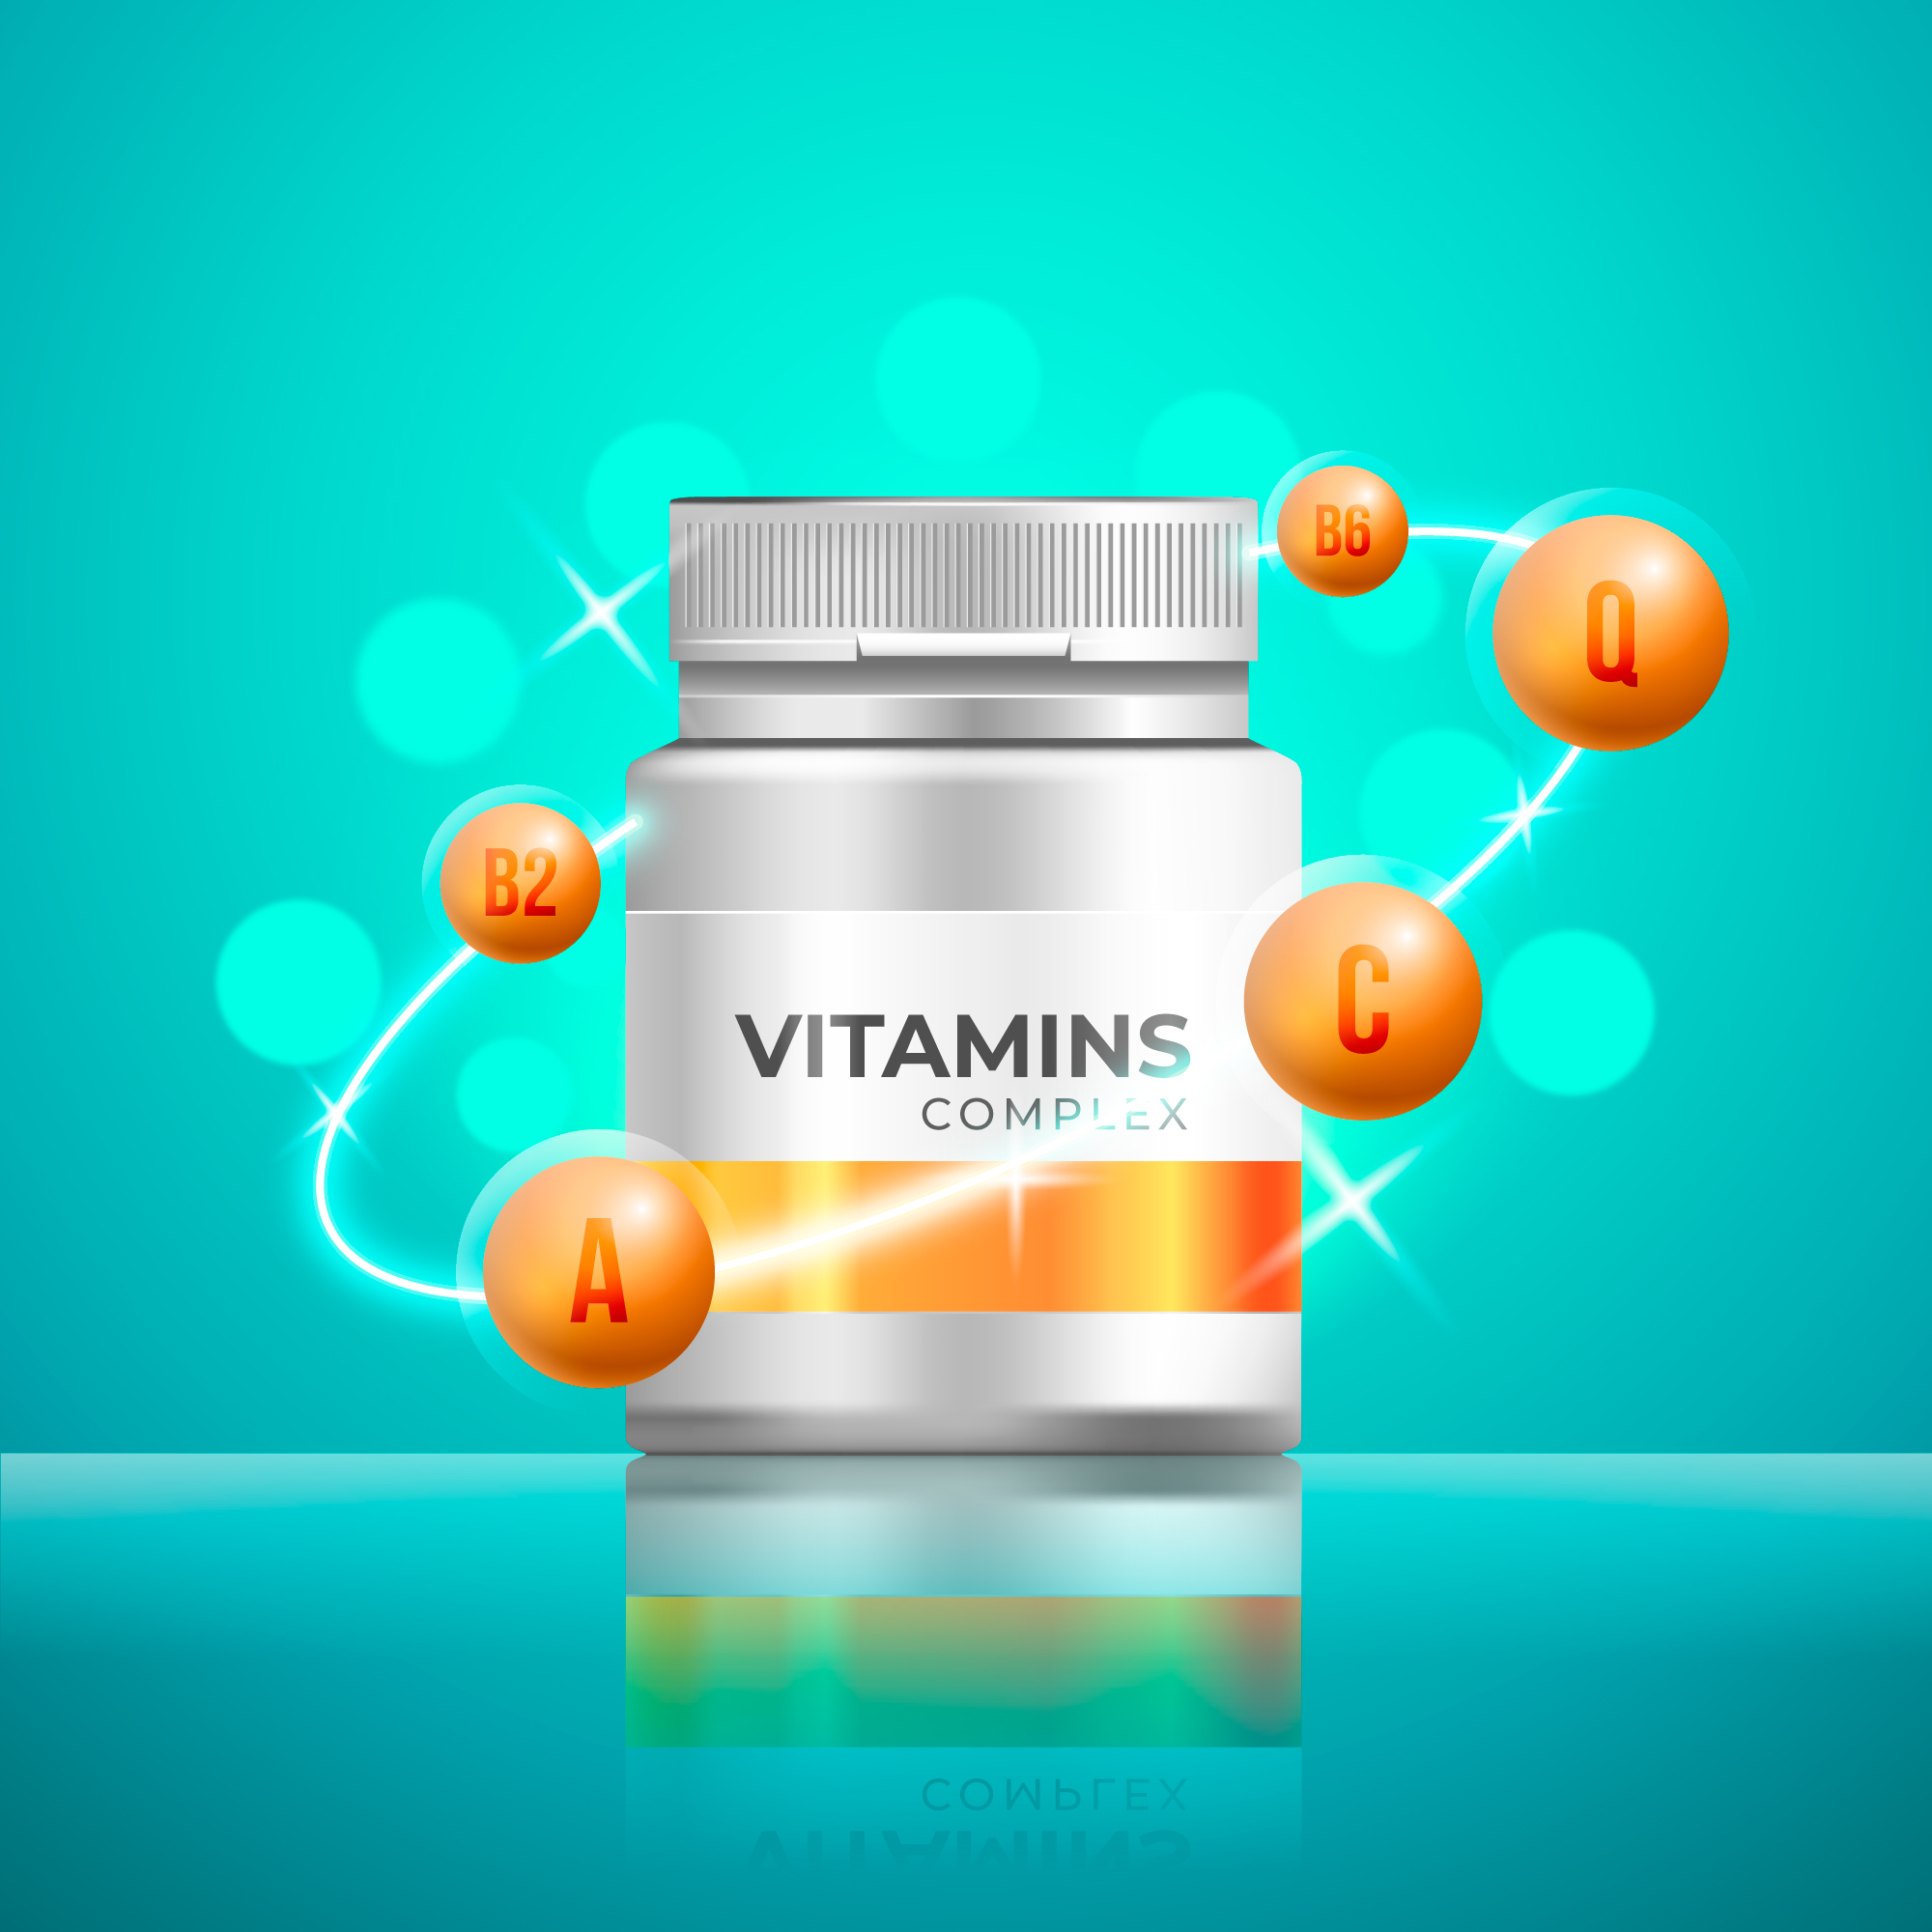 Vitamins are part of a healthy and complete diet.